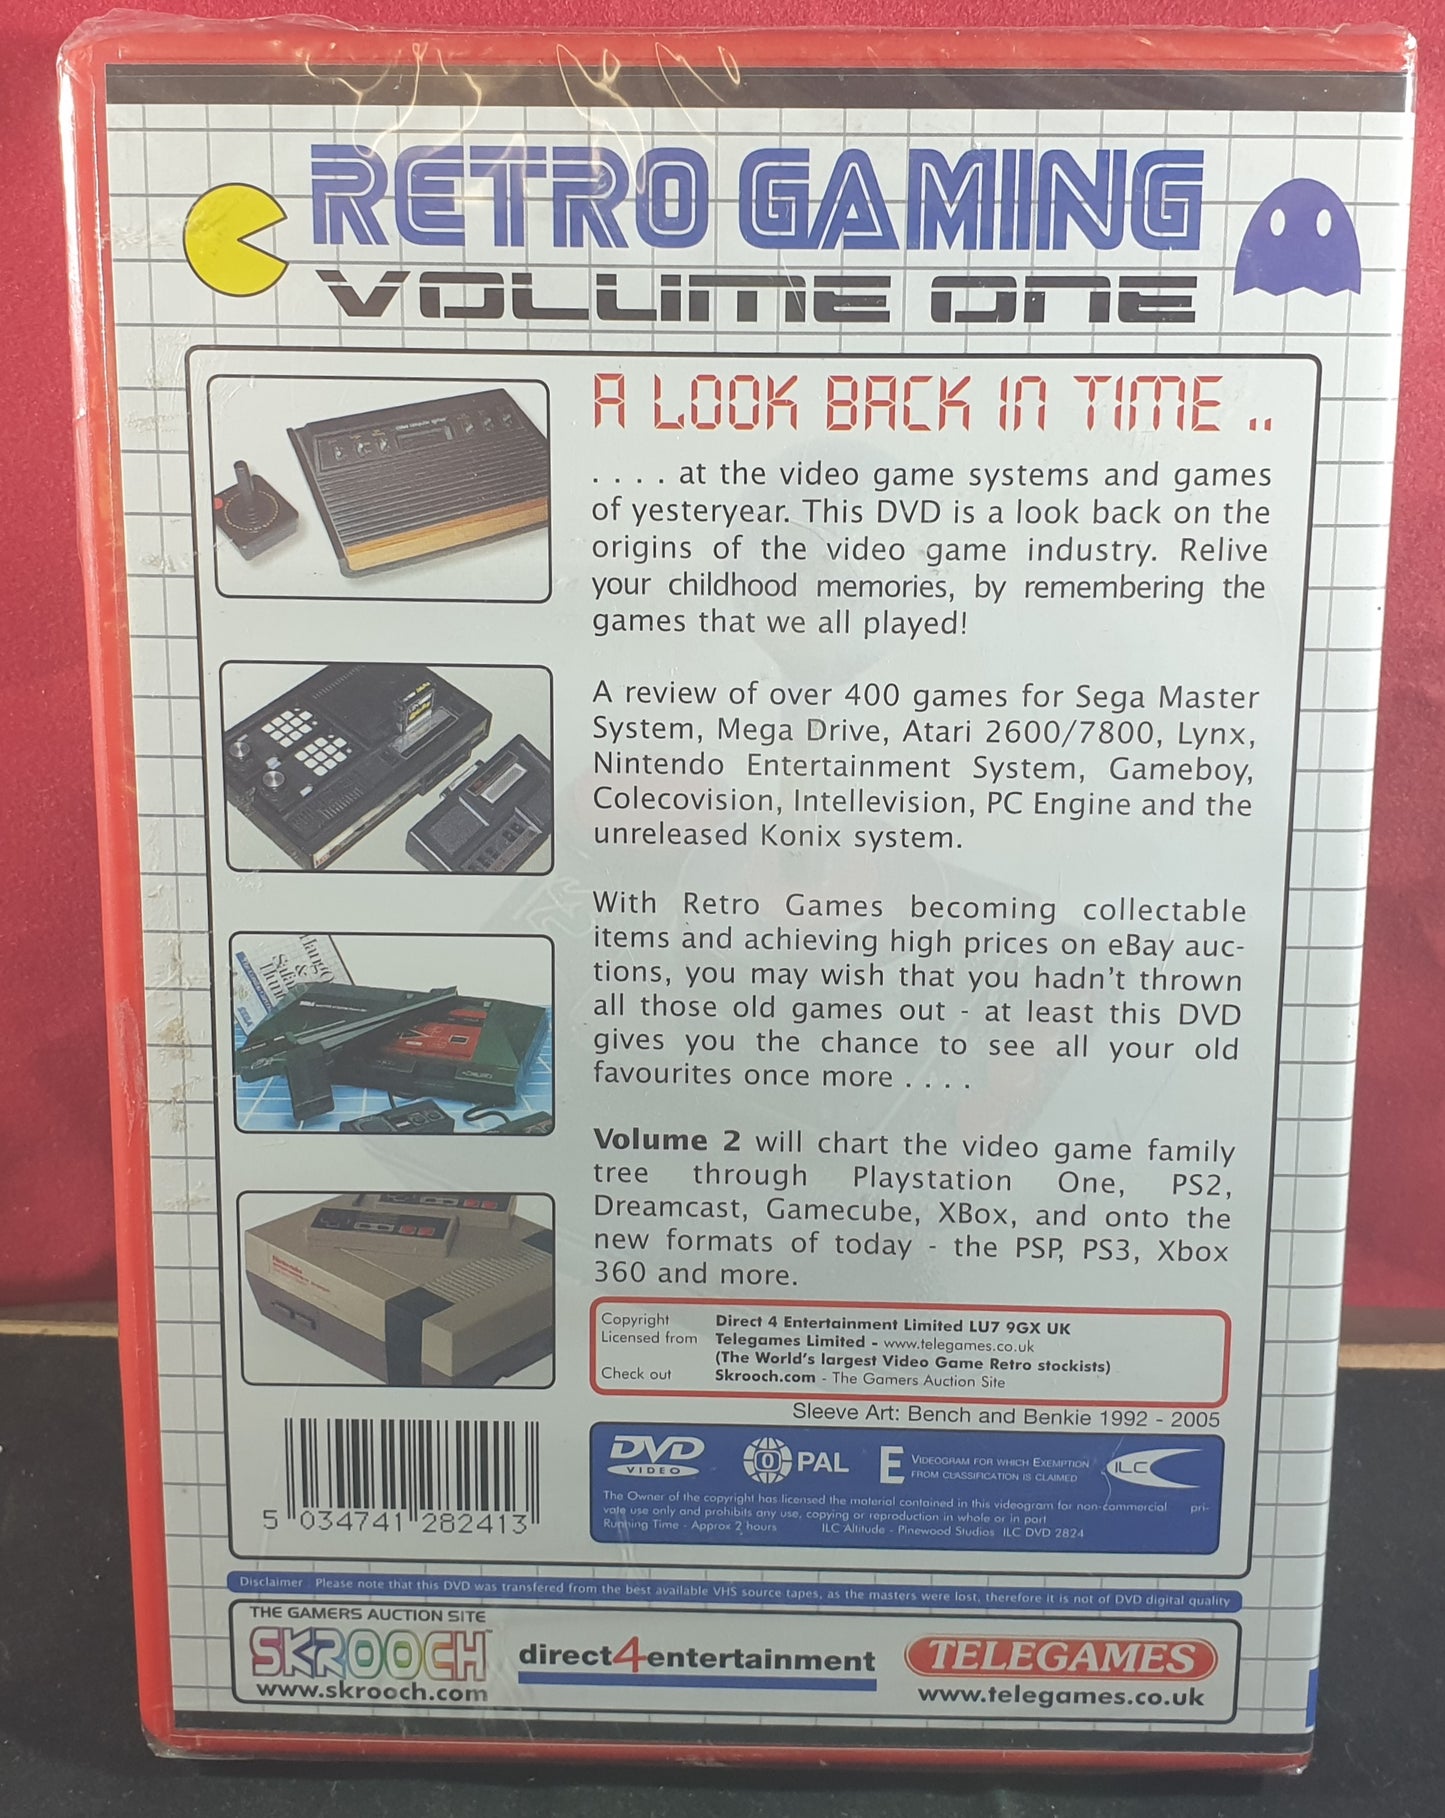 Brand New and Sealed Retro Gaming Volume 1 DVD